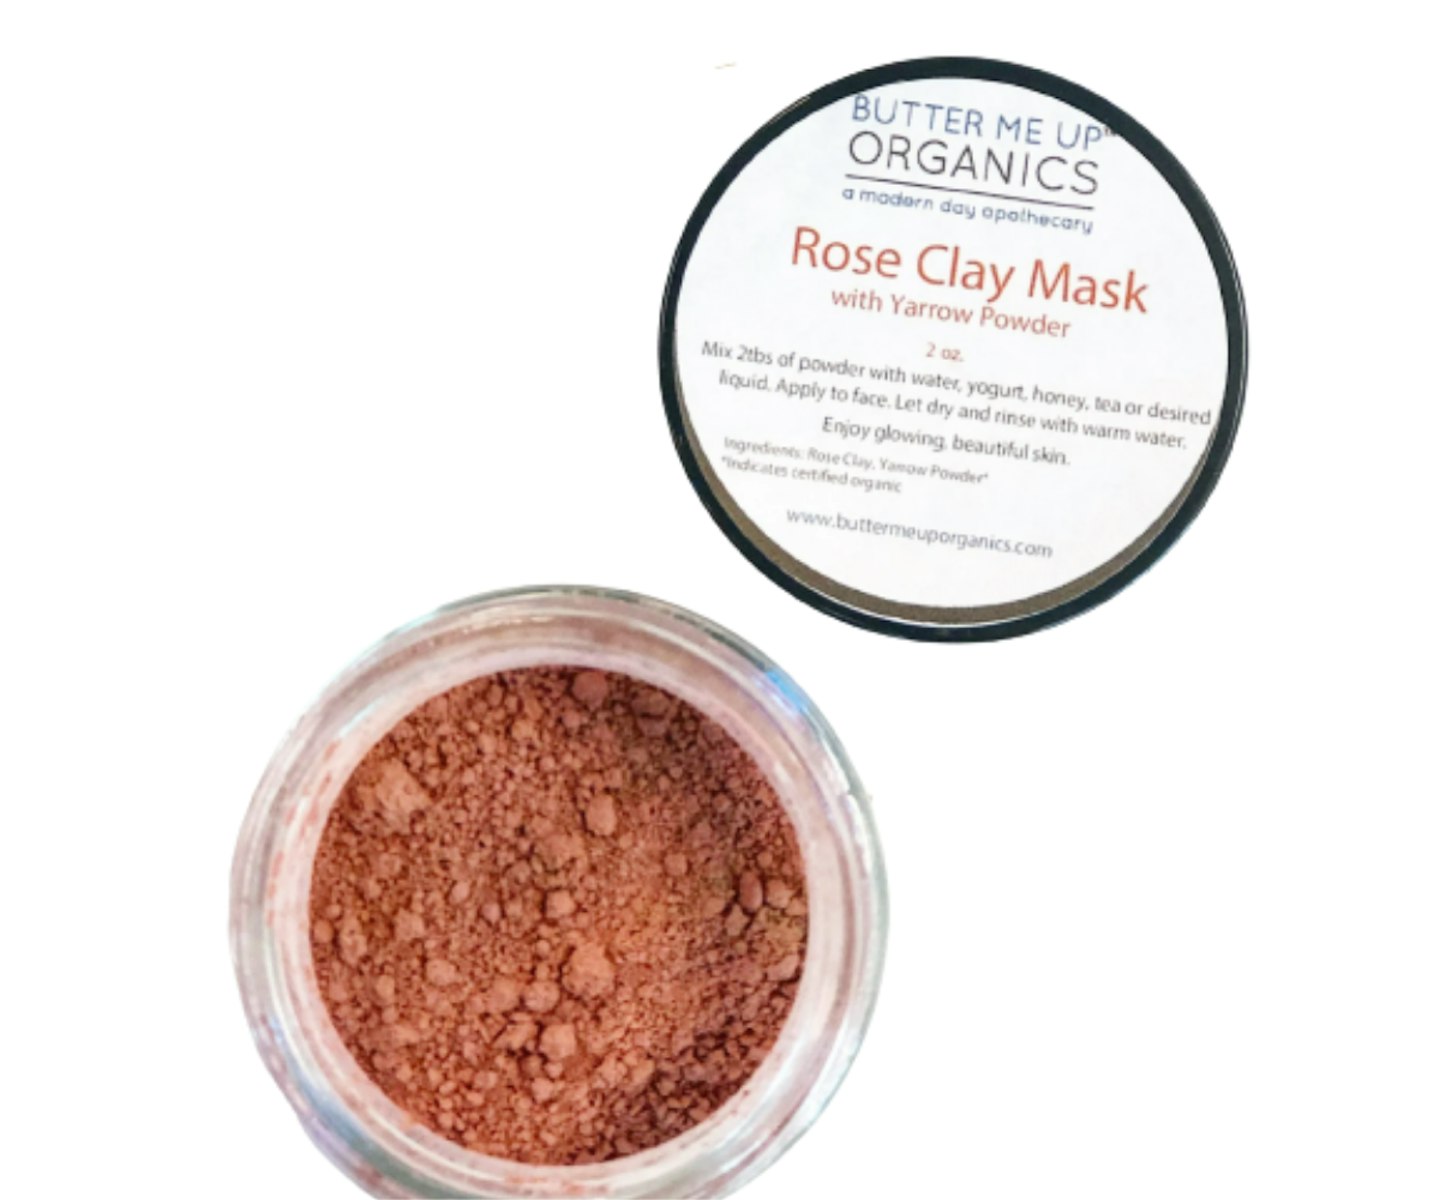 A picture of the Butter Me Up Organics Rose Clay Mask and what is inside the product.